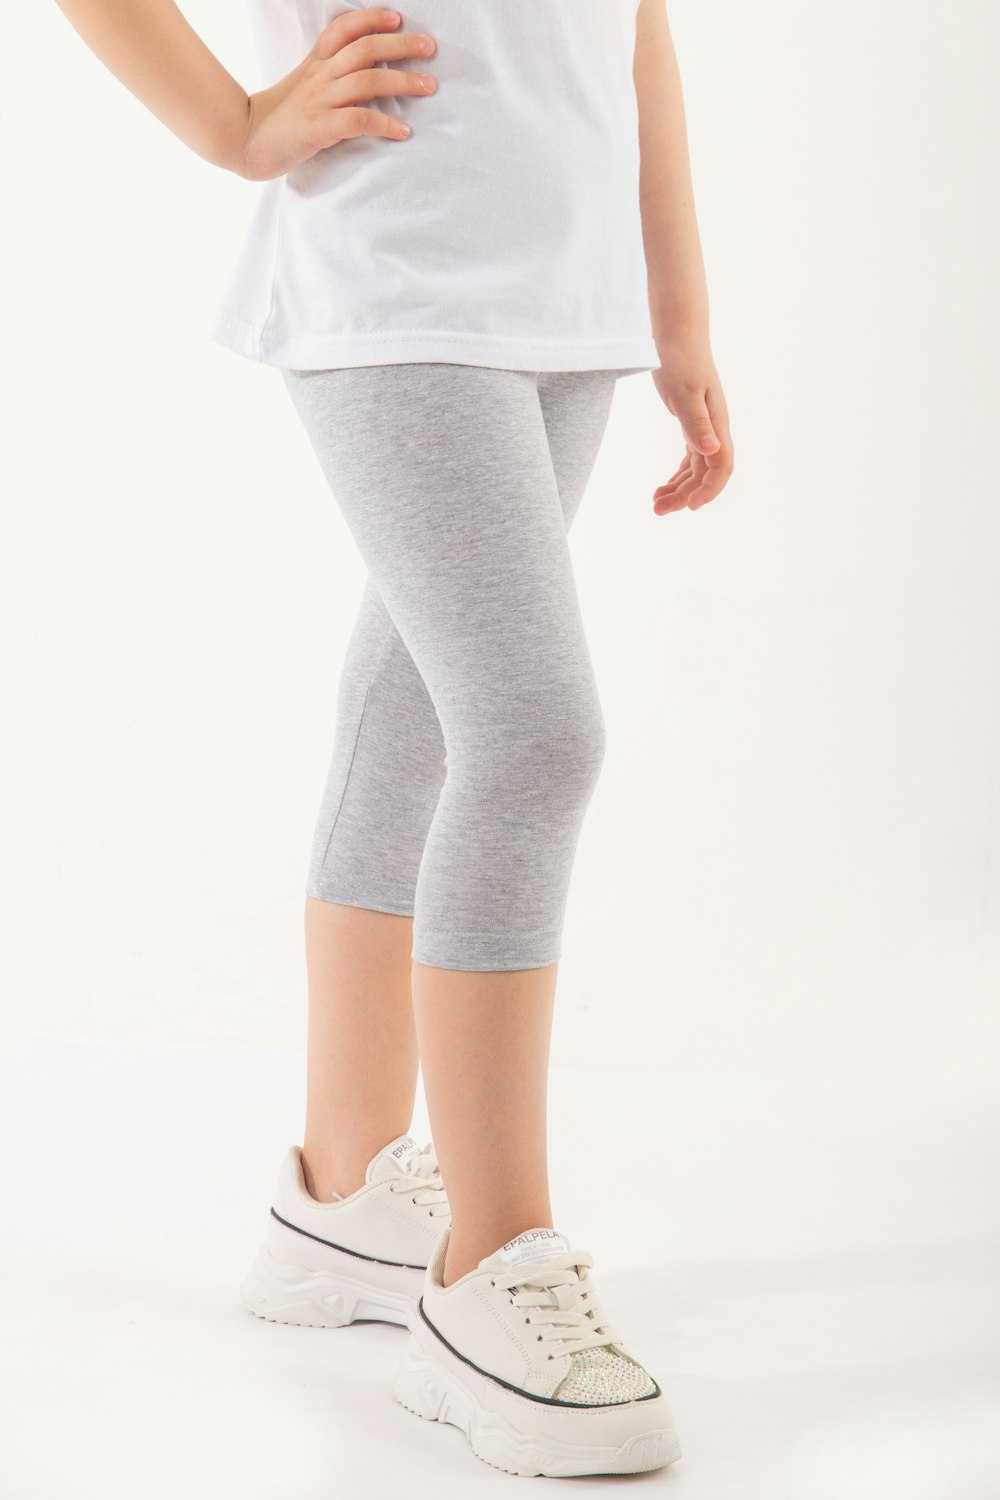 a little girl in a white shirt and grey leggings